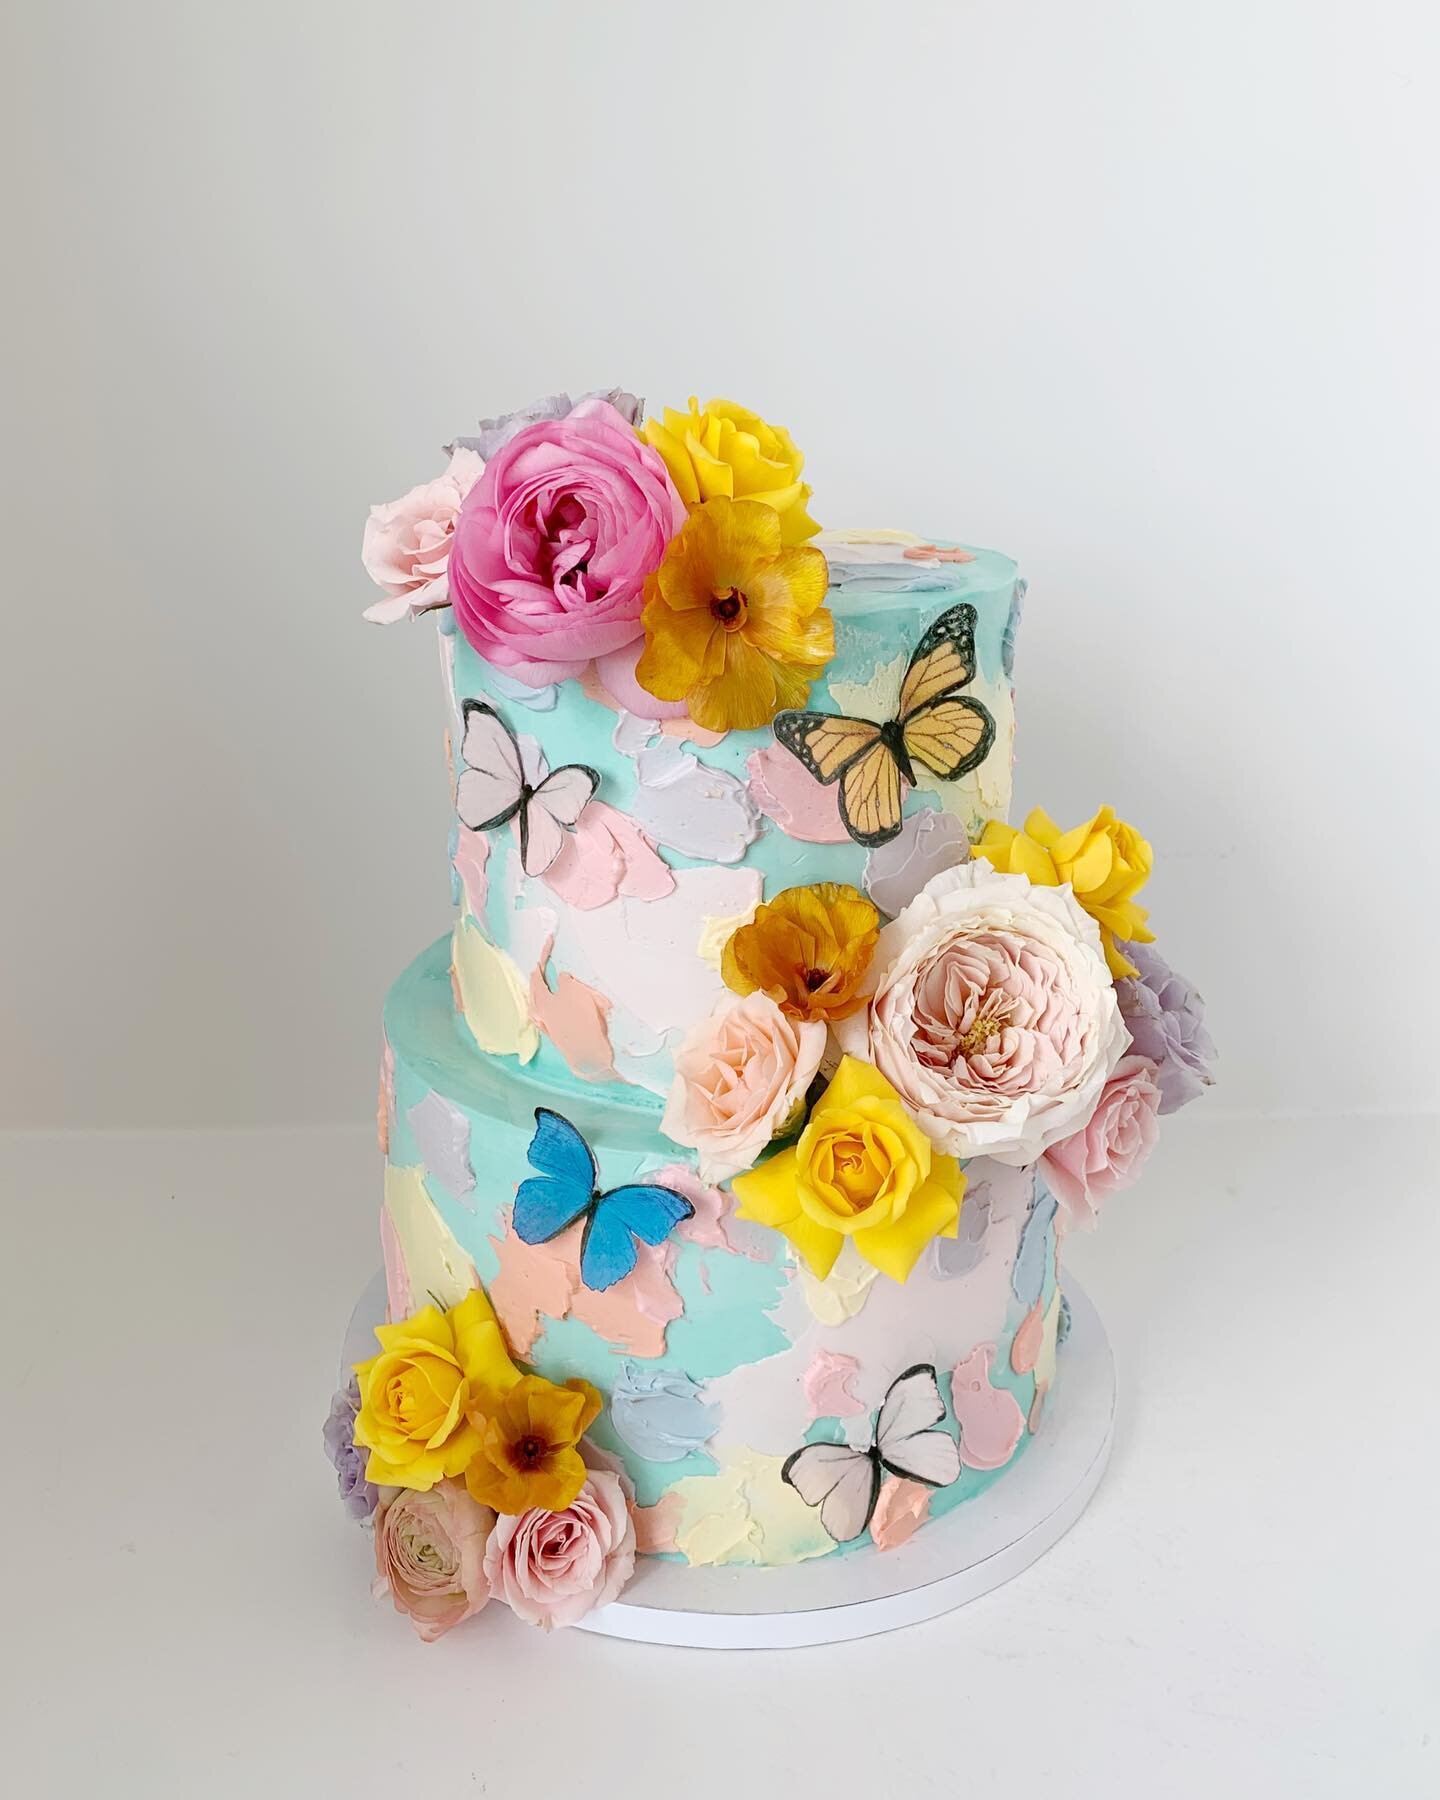 When we take inspiration from some of our past work to make something completely new and unique for our client! This pretty cake has all of our signature elements - pastel colors, florals and butterflies!🦋
.
.
.
.
.
#houstoncakes #houstonbaker #hous